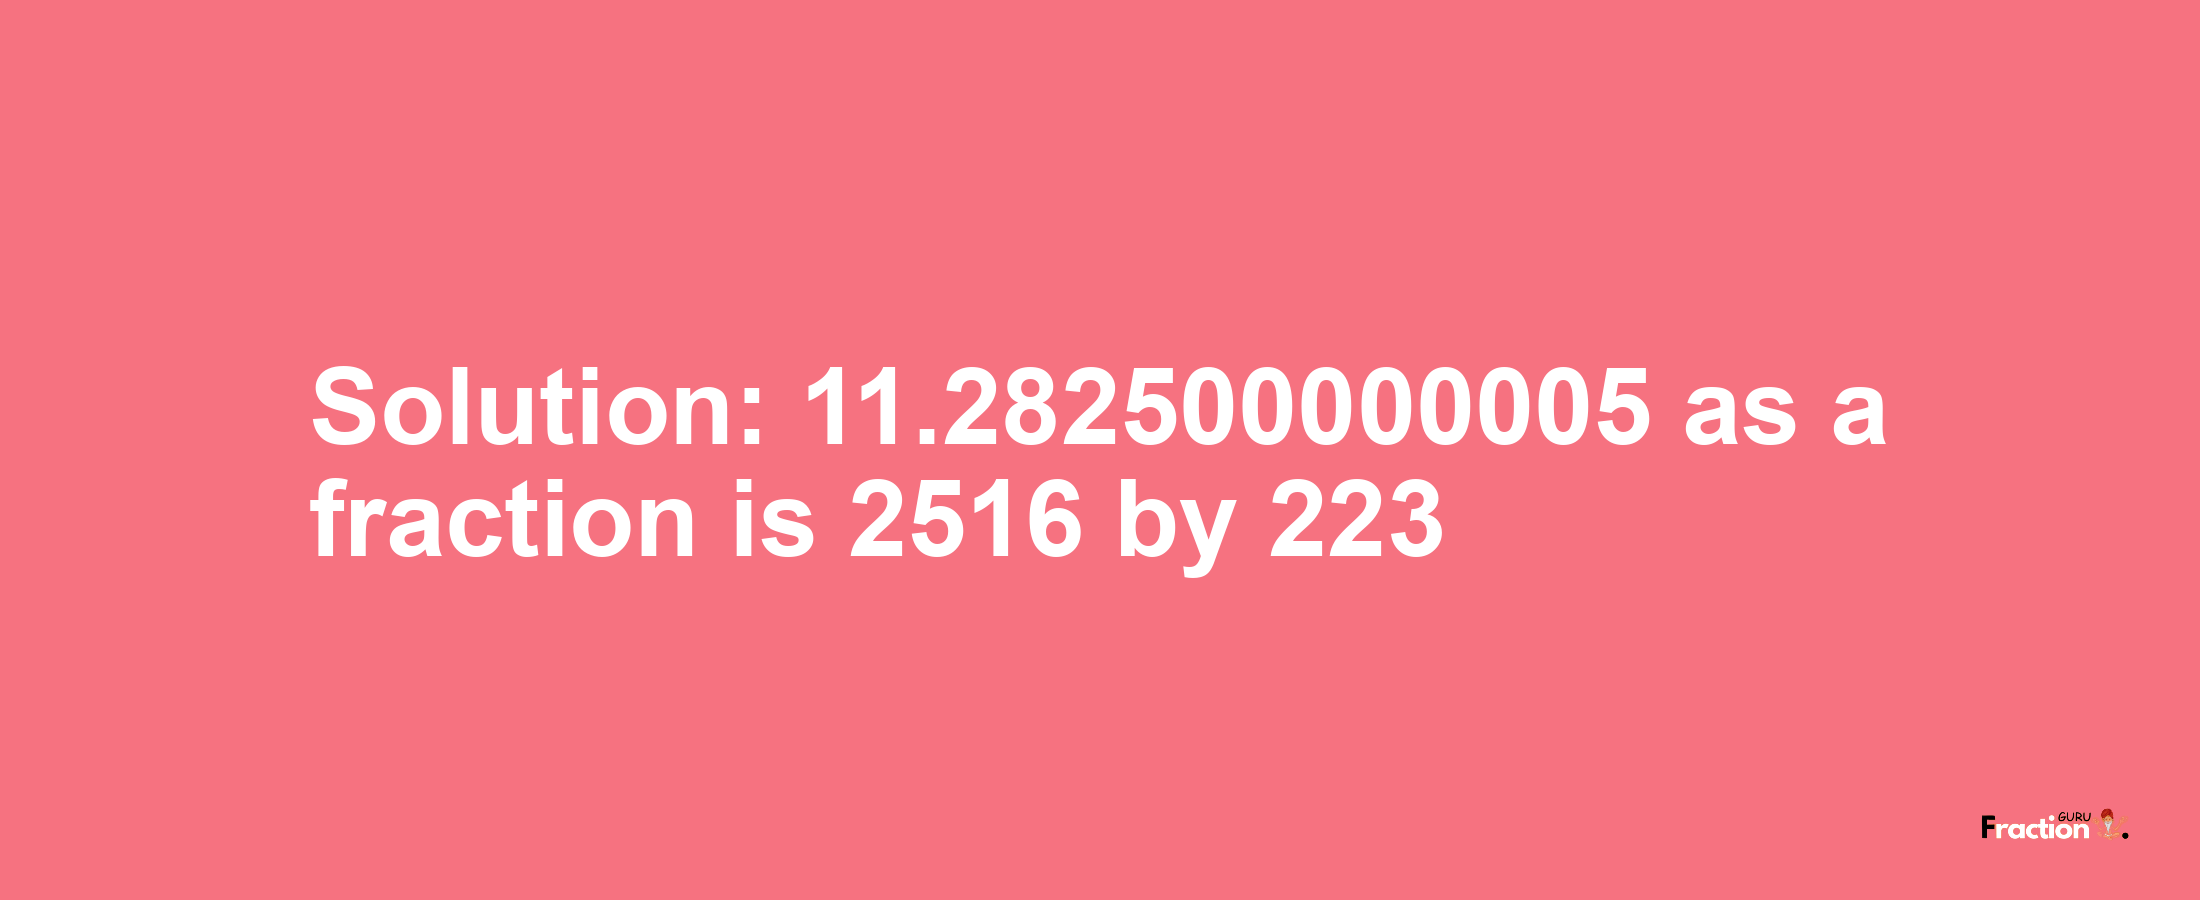 Solution:11.282500000005 as a fraction is 2516/223